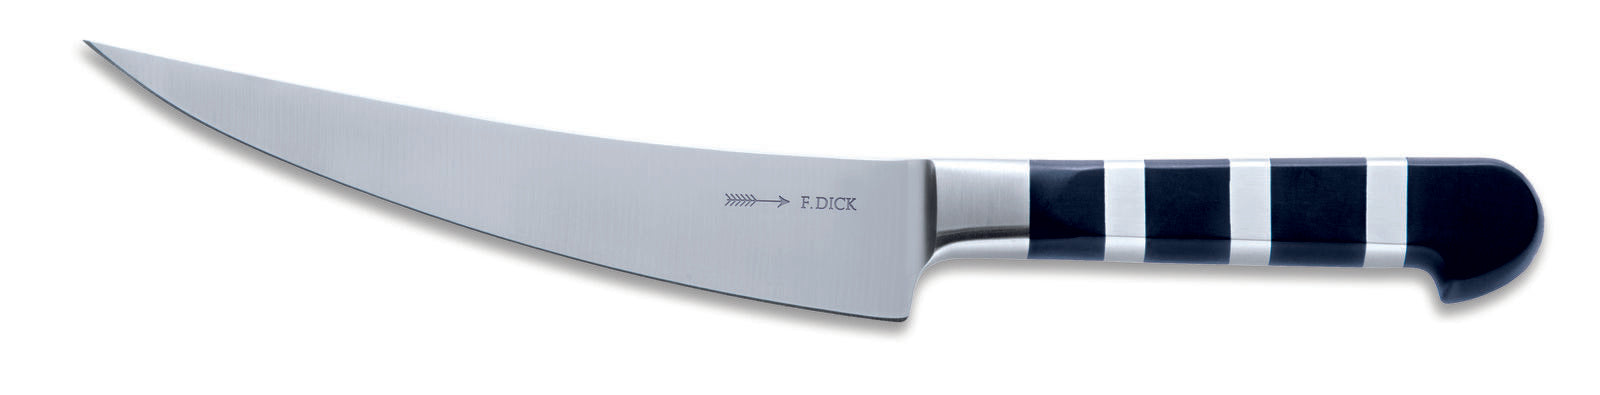 F. Dick (8192518) 7" Carving/Butcher Knife - 1905 Series-cityfoodequipment.com